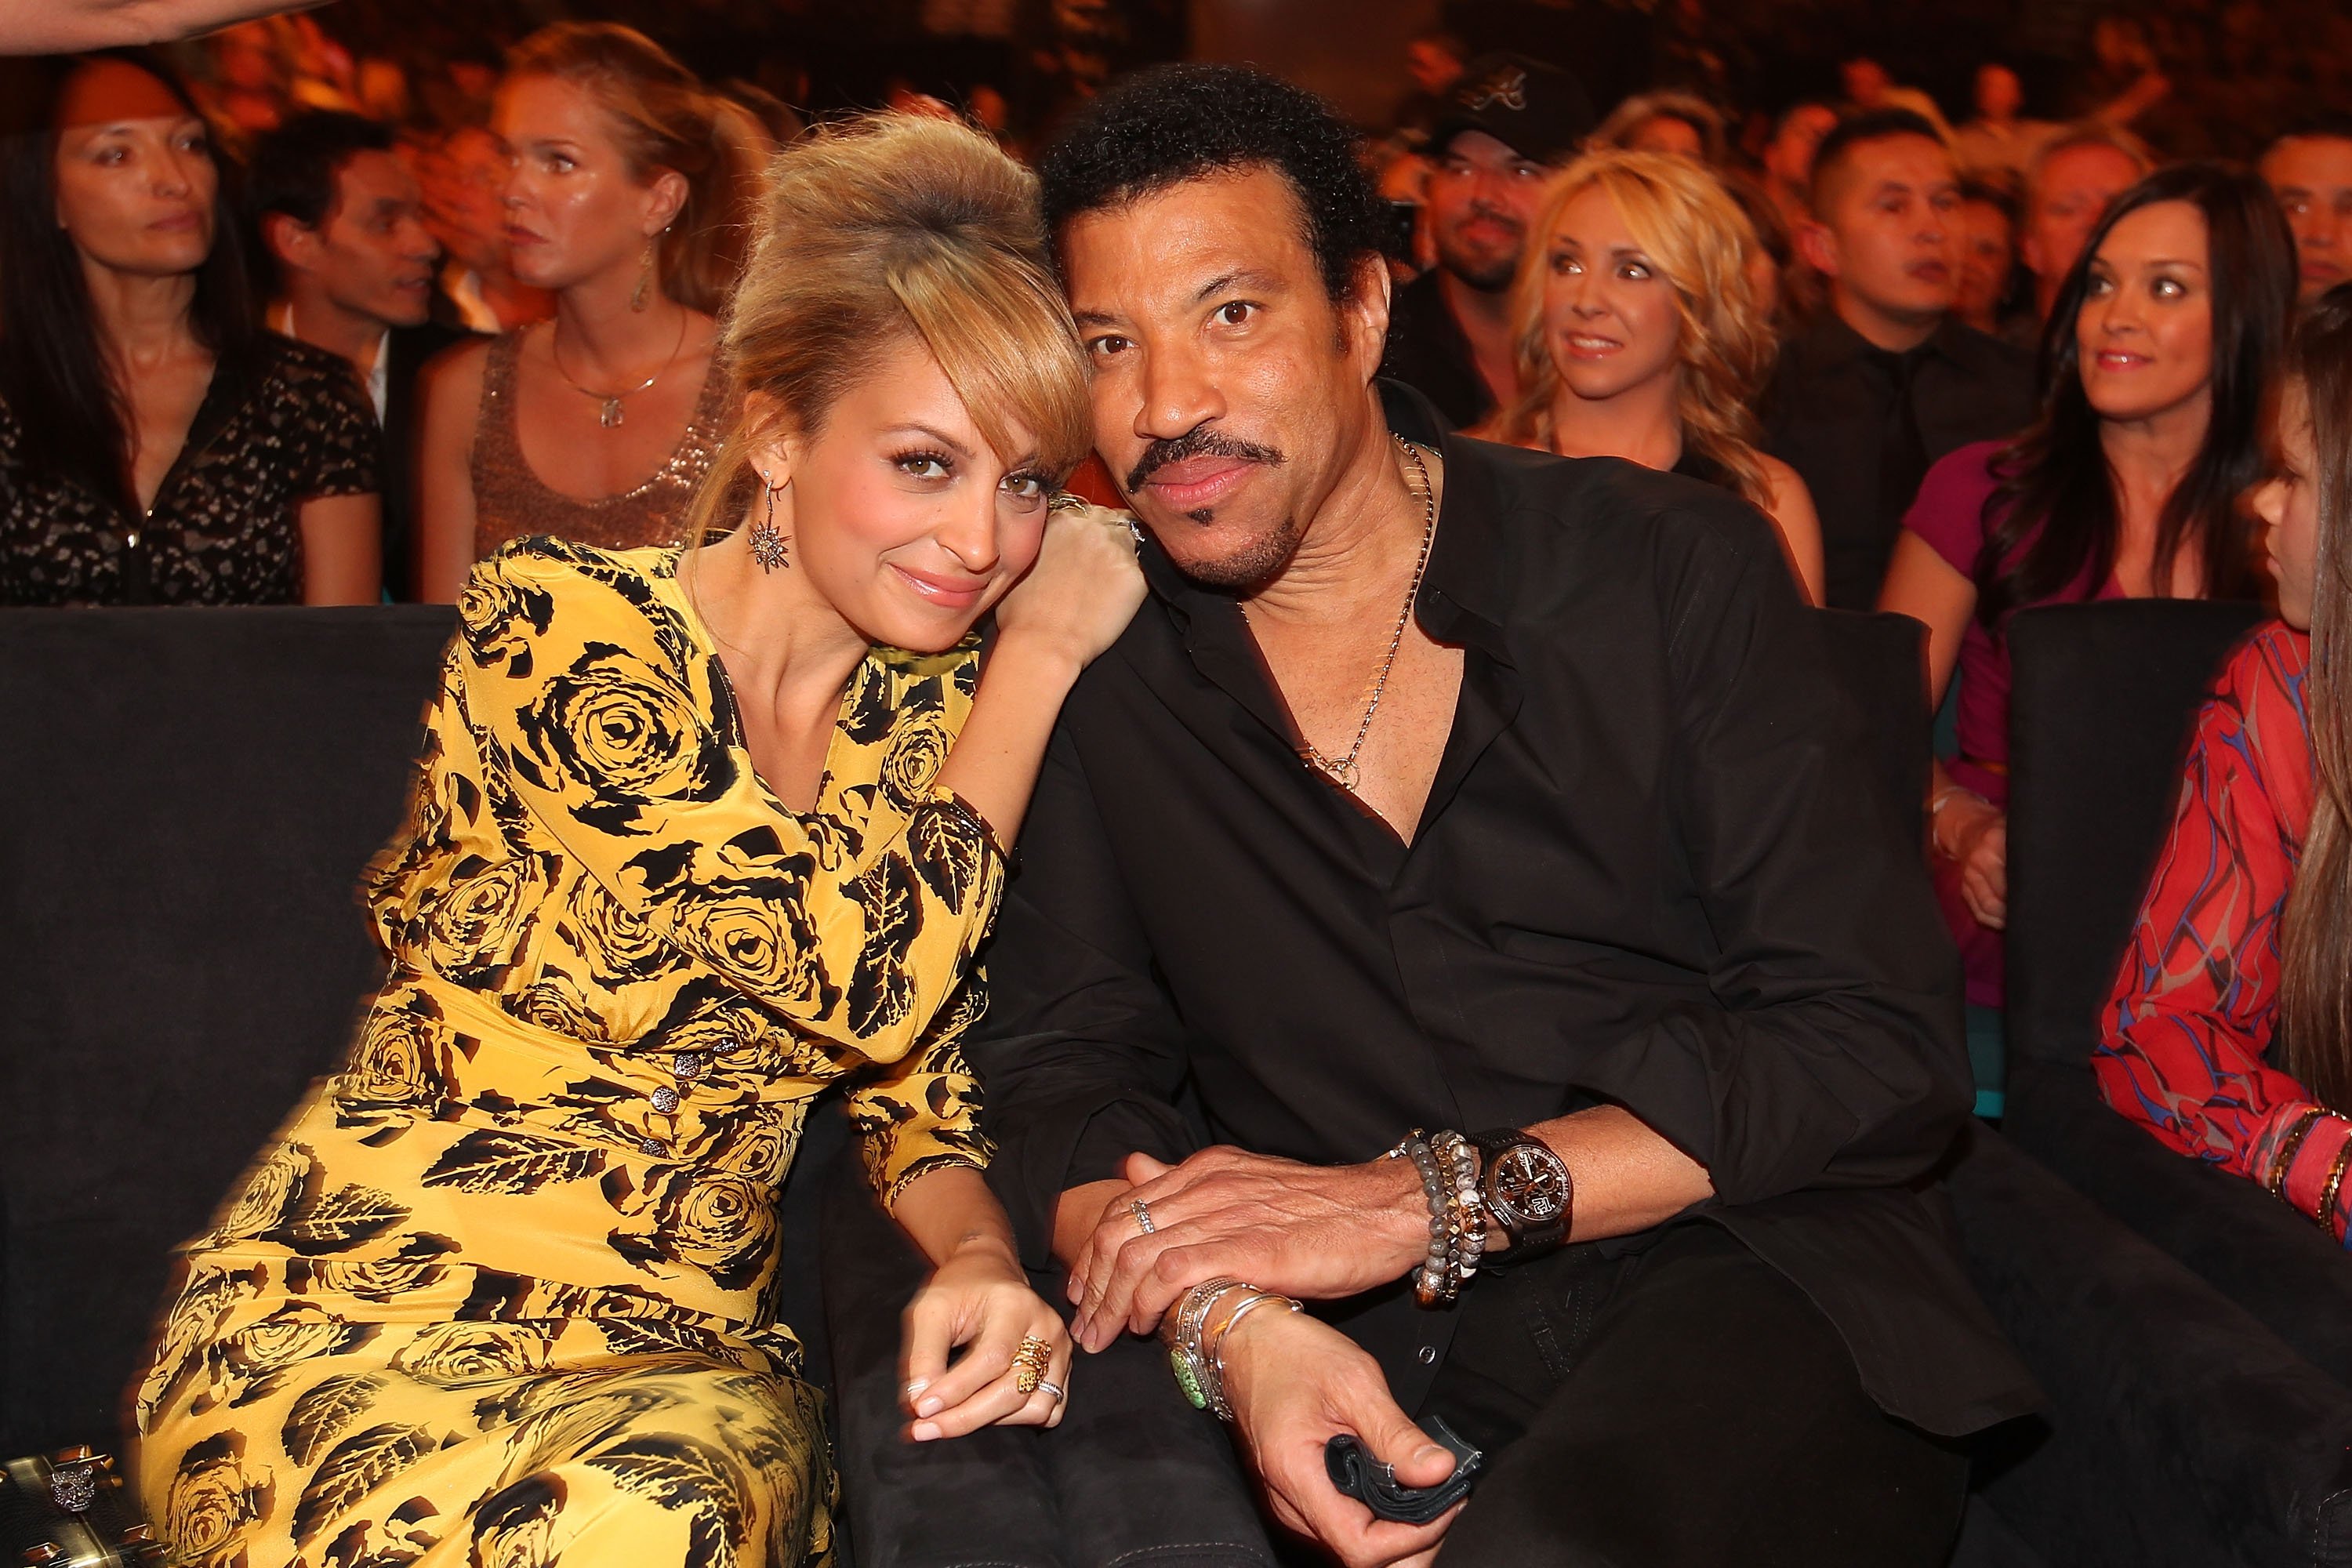 Lionel Richie and Nicole Richie in Las Vegas. | Source: Getty Images